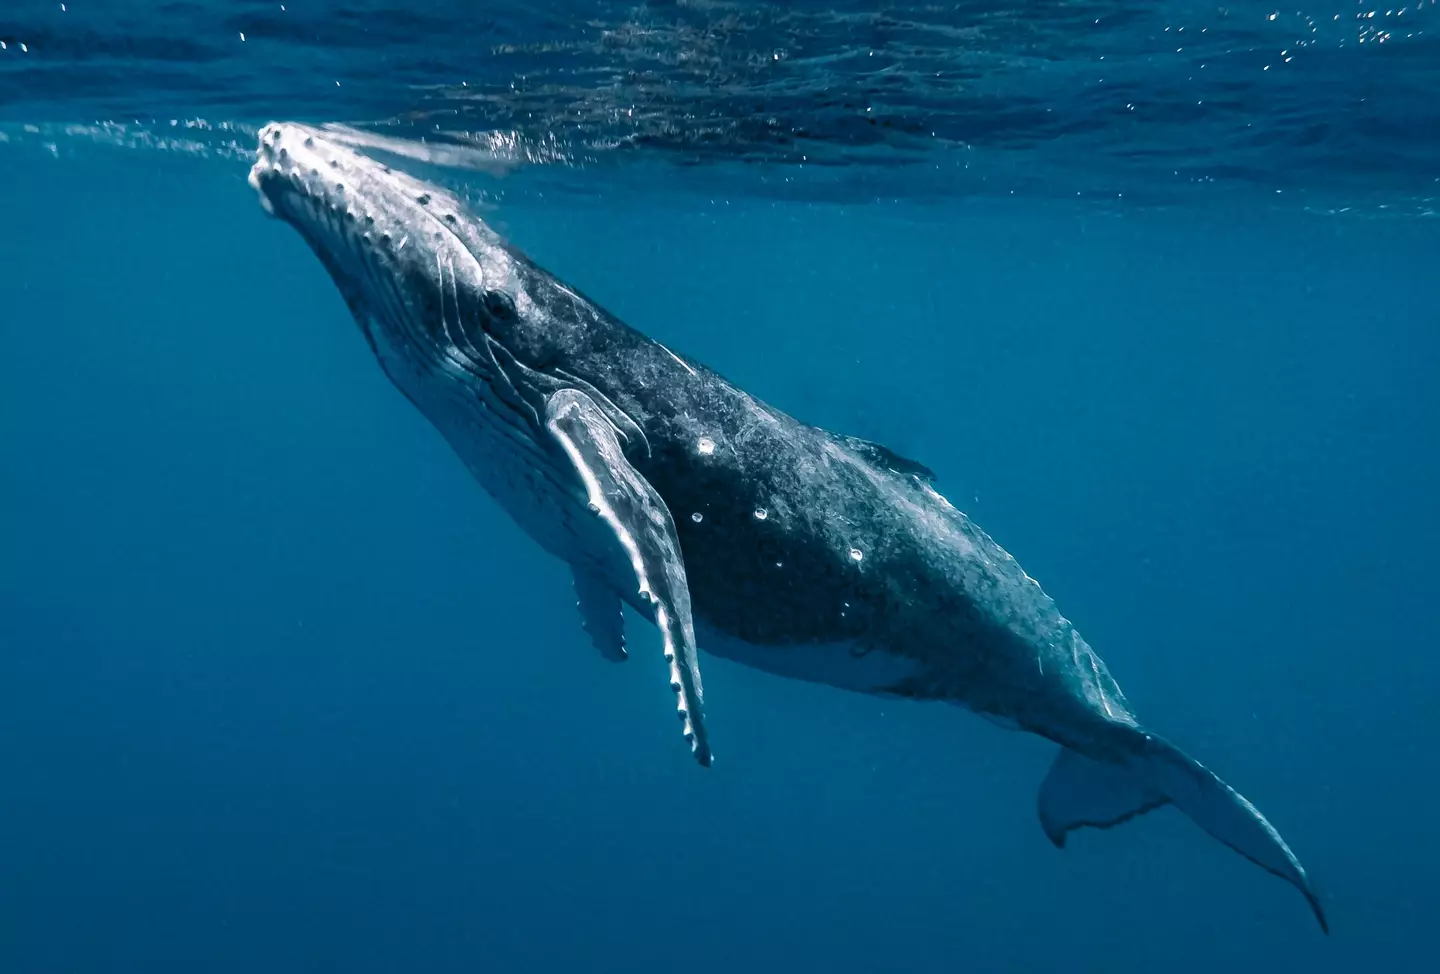 Scientists said they had a 20 minute conservation with a humpback whale.